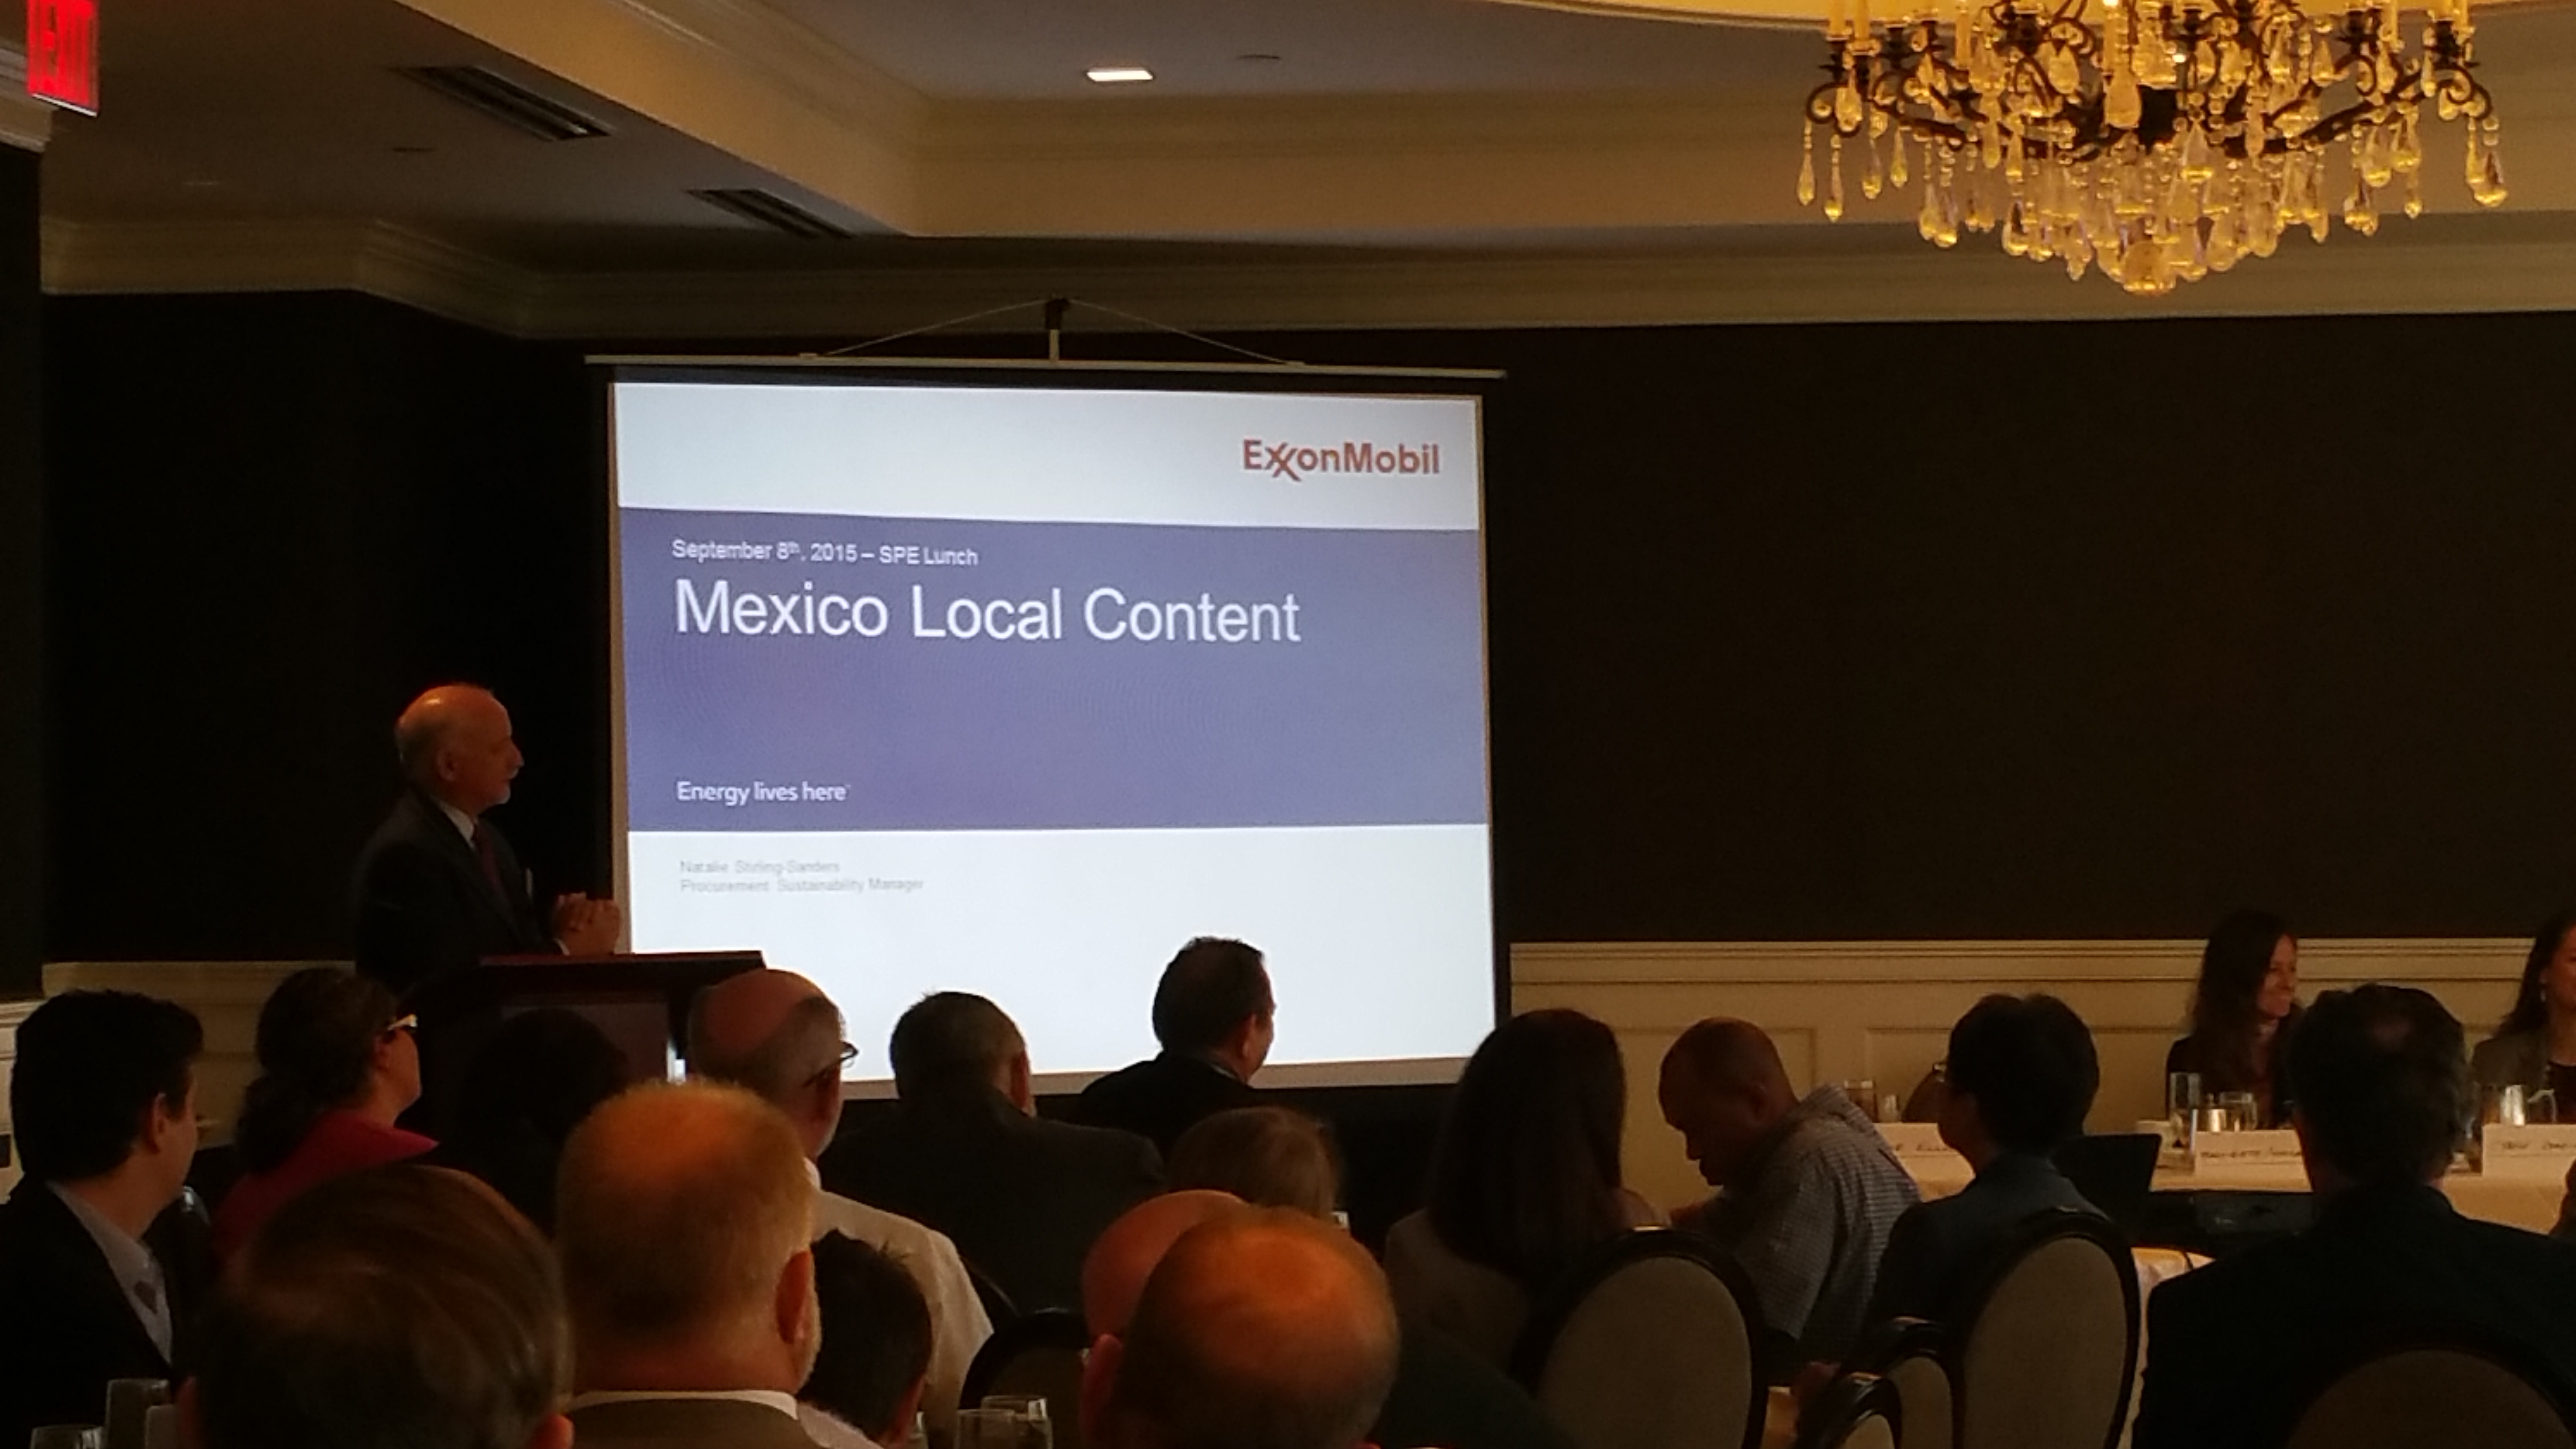 International: Local Content in Mexico